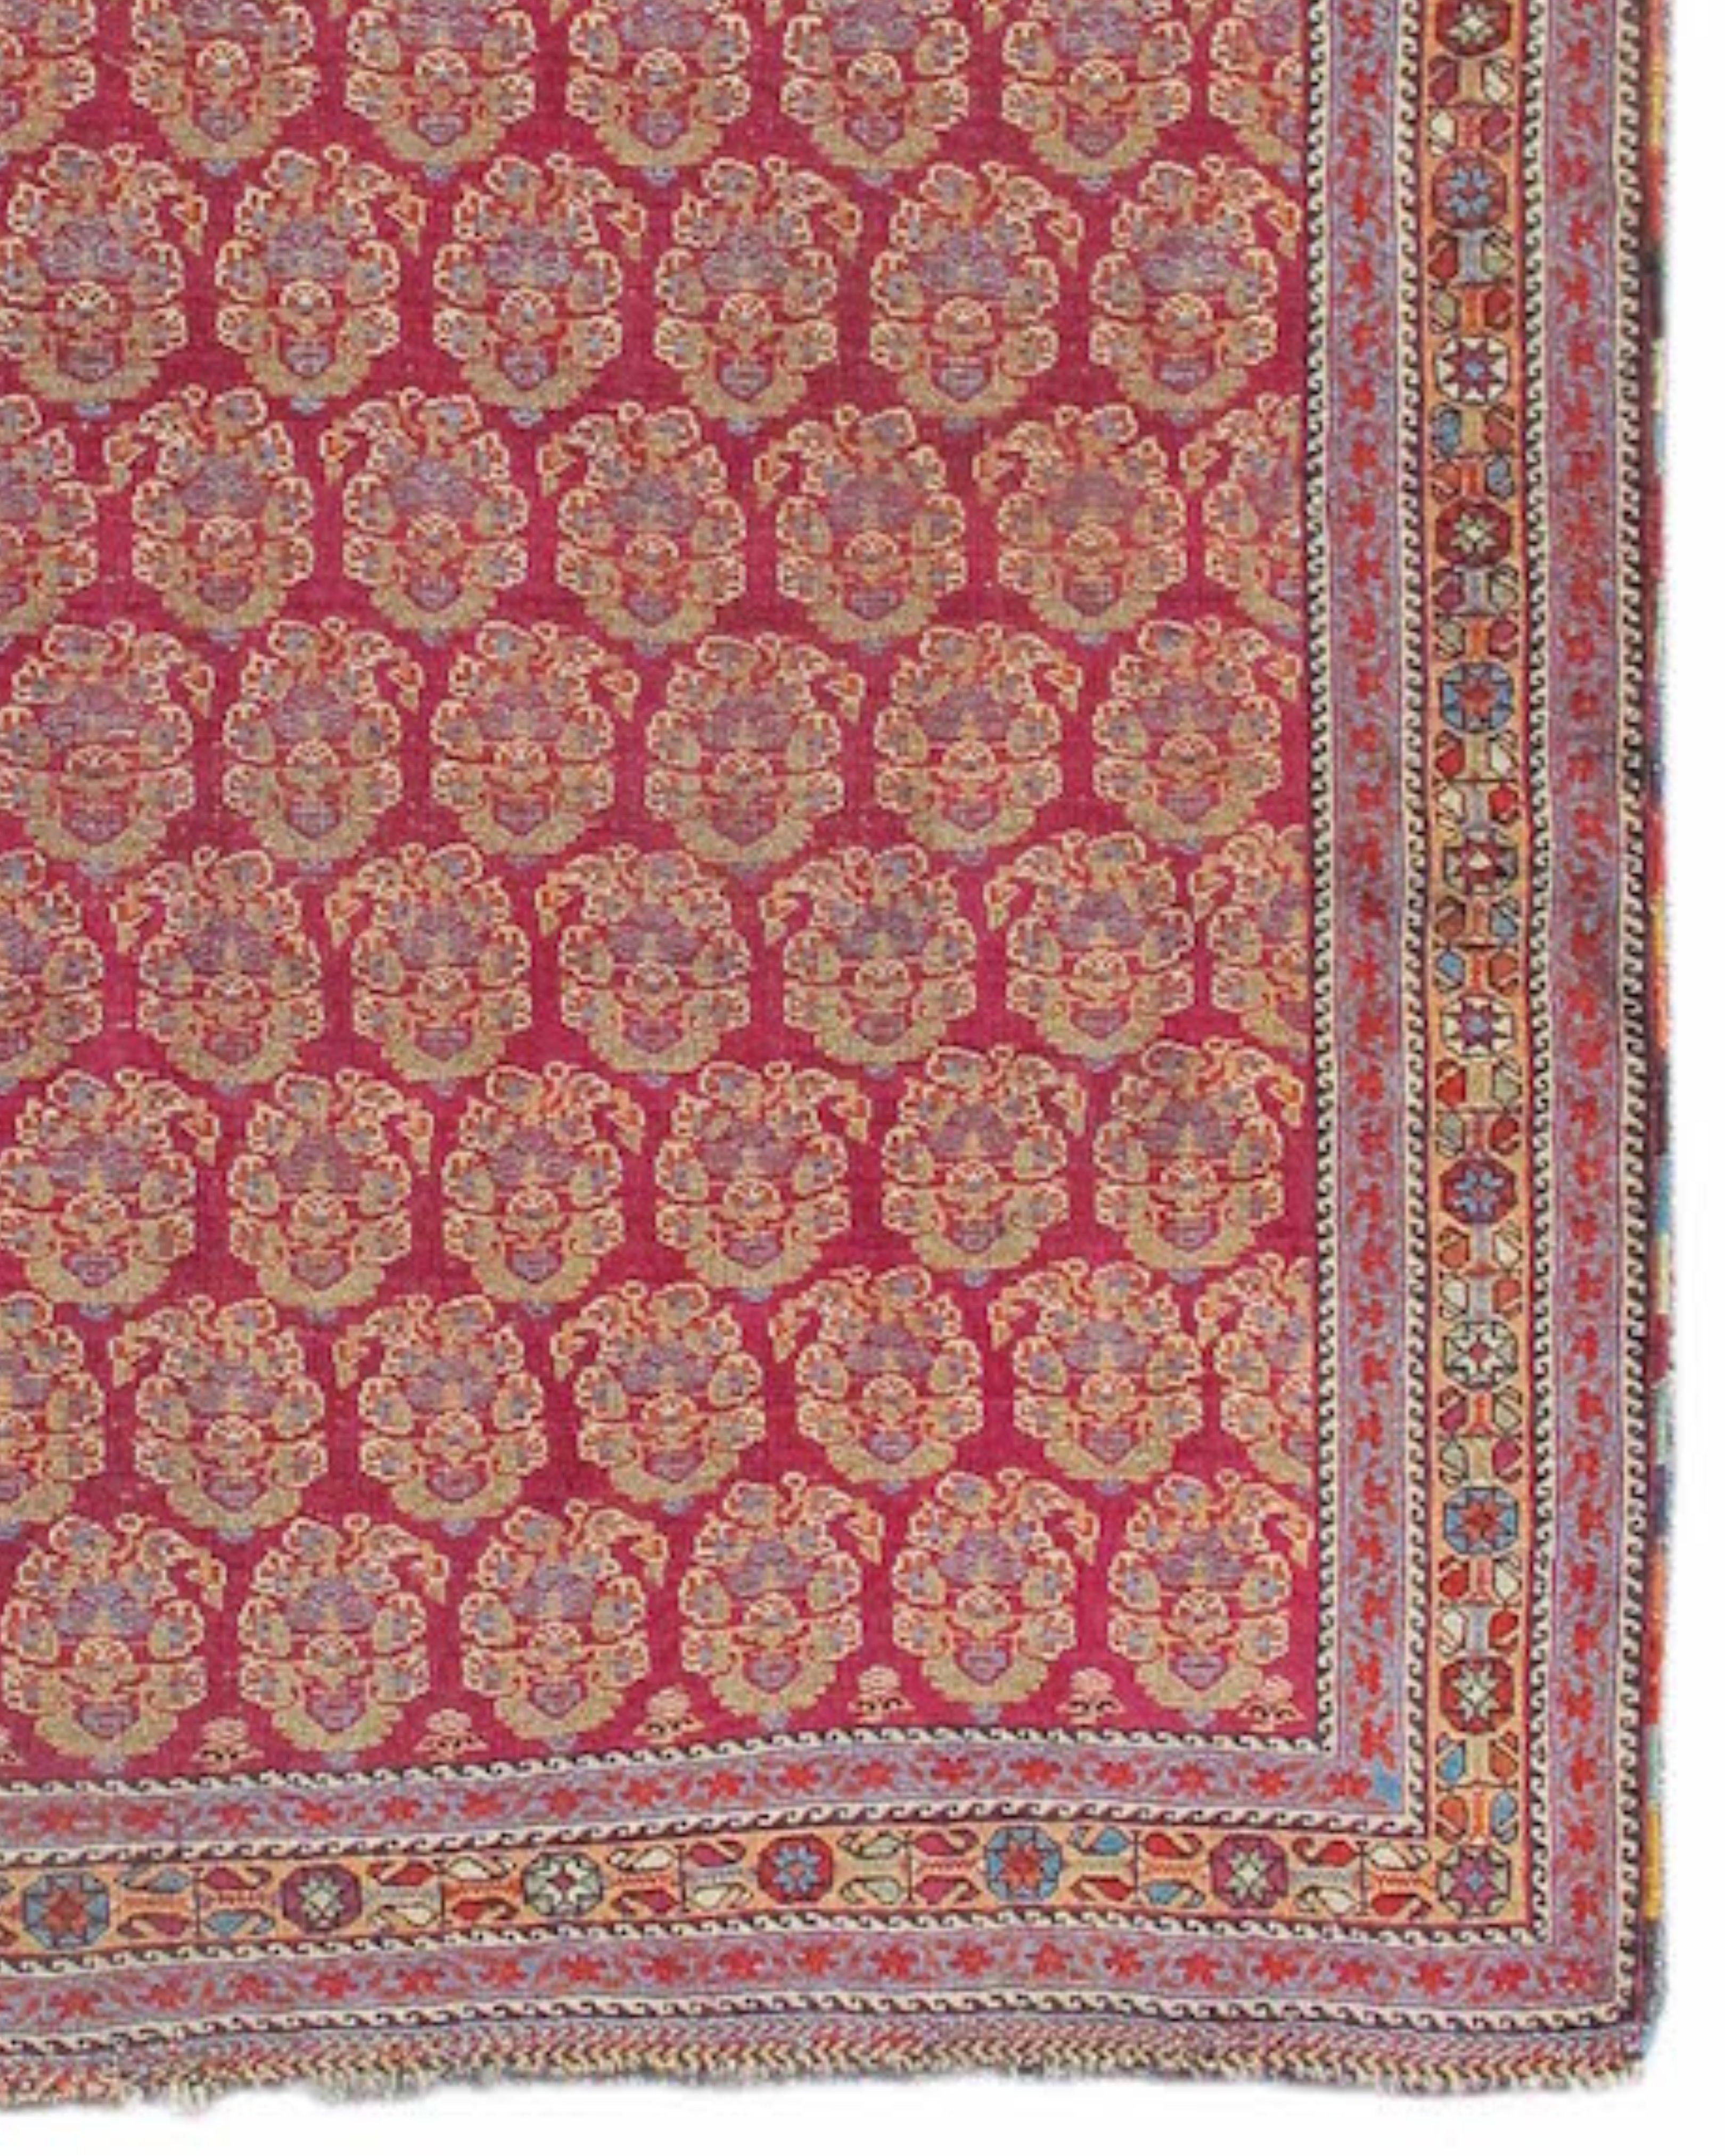 Afshar Rug 17463, 19th century

Exuding elegance, this finest of Afshar rugs is woven with symmetrical knots and a delicateness that approaches petit point. Afshar pile weaving was greatly inspired by the textile traditions of Persia, particularly